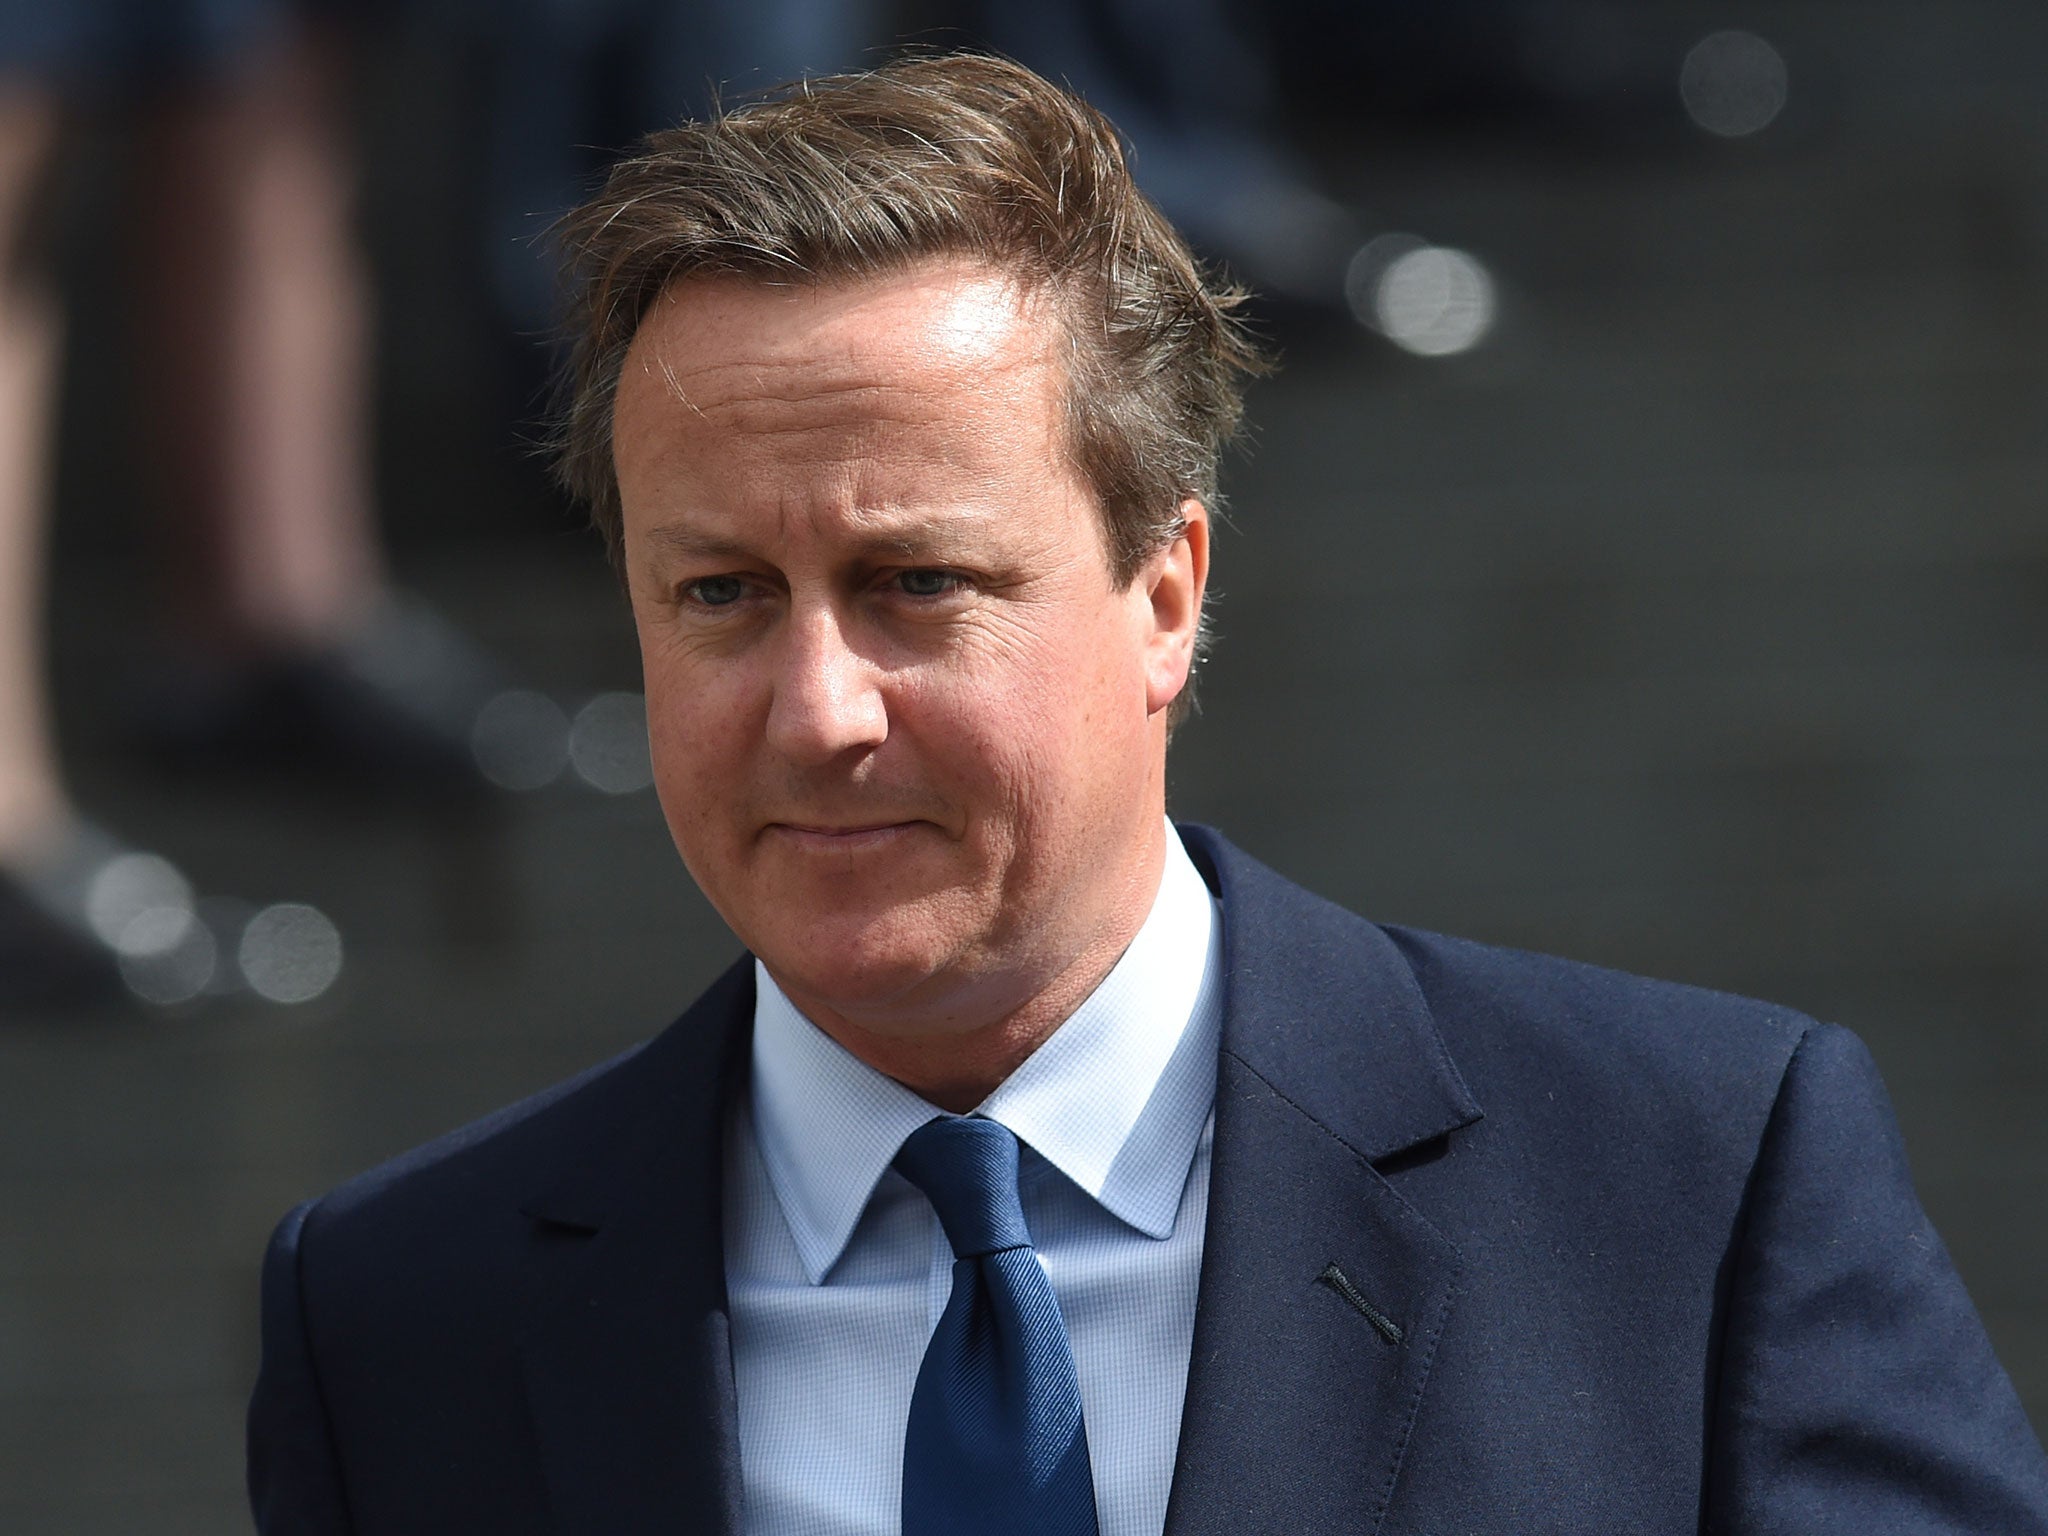 David Cameron has been accused of being a member of another debauched Oxford society apart from the Bullingdon Club